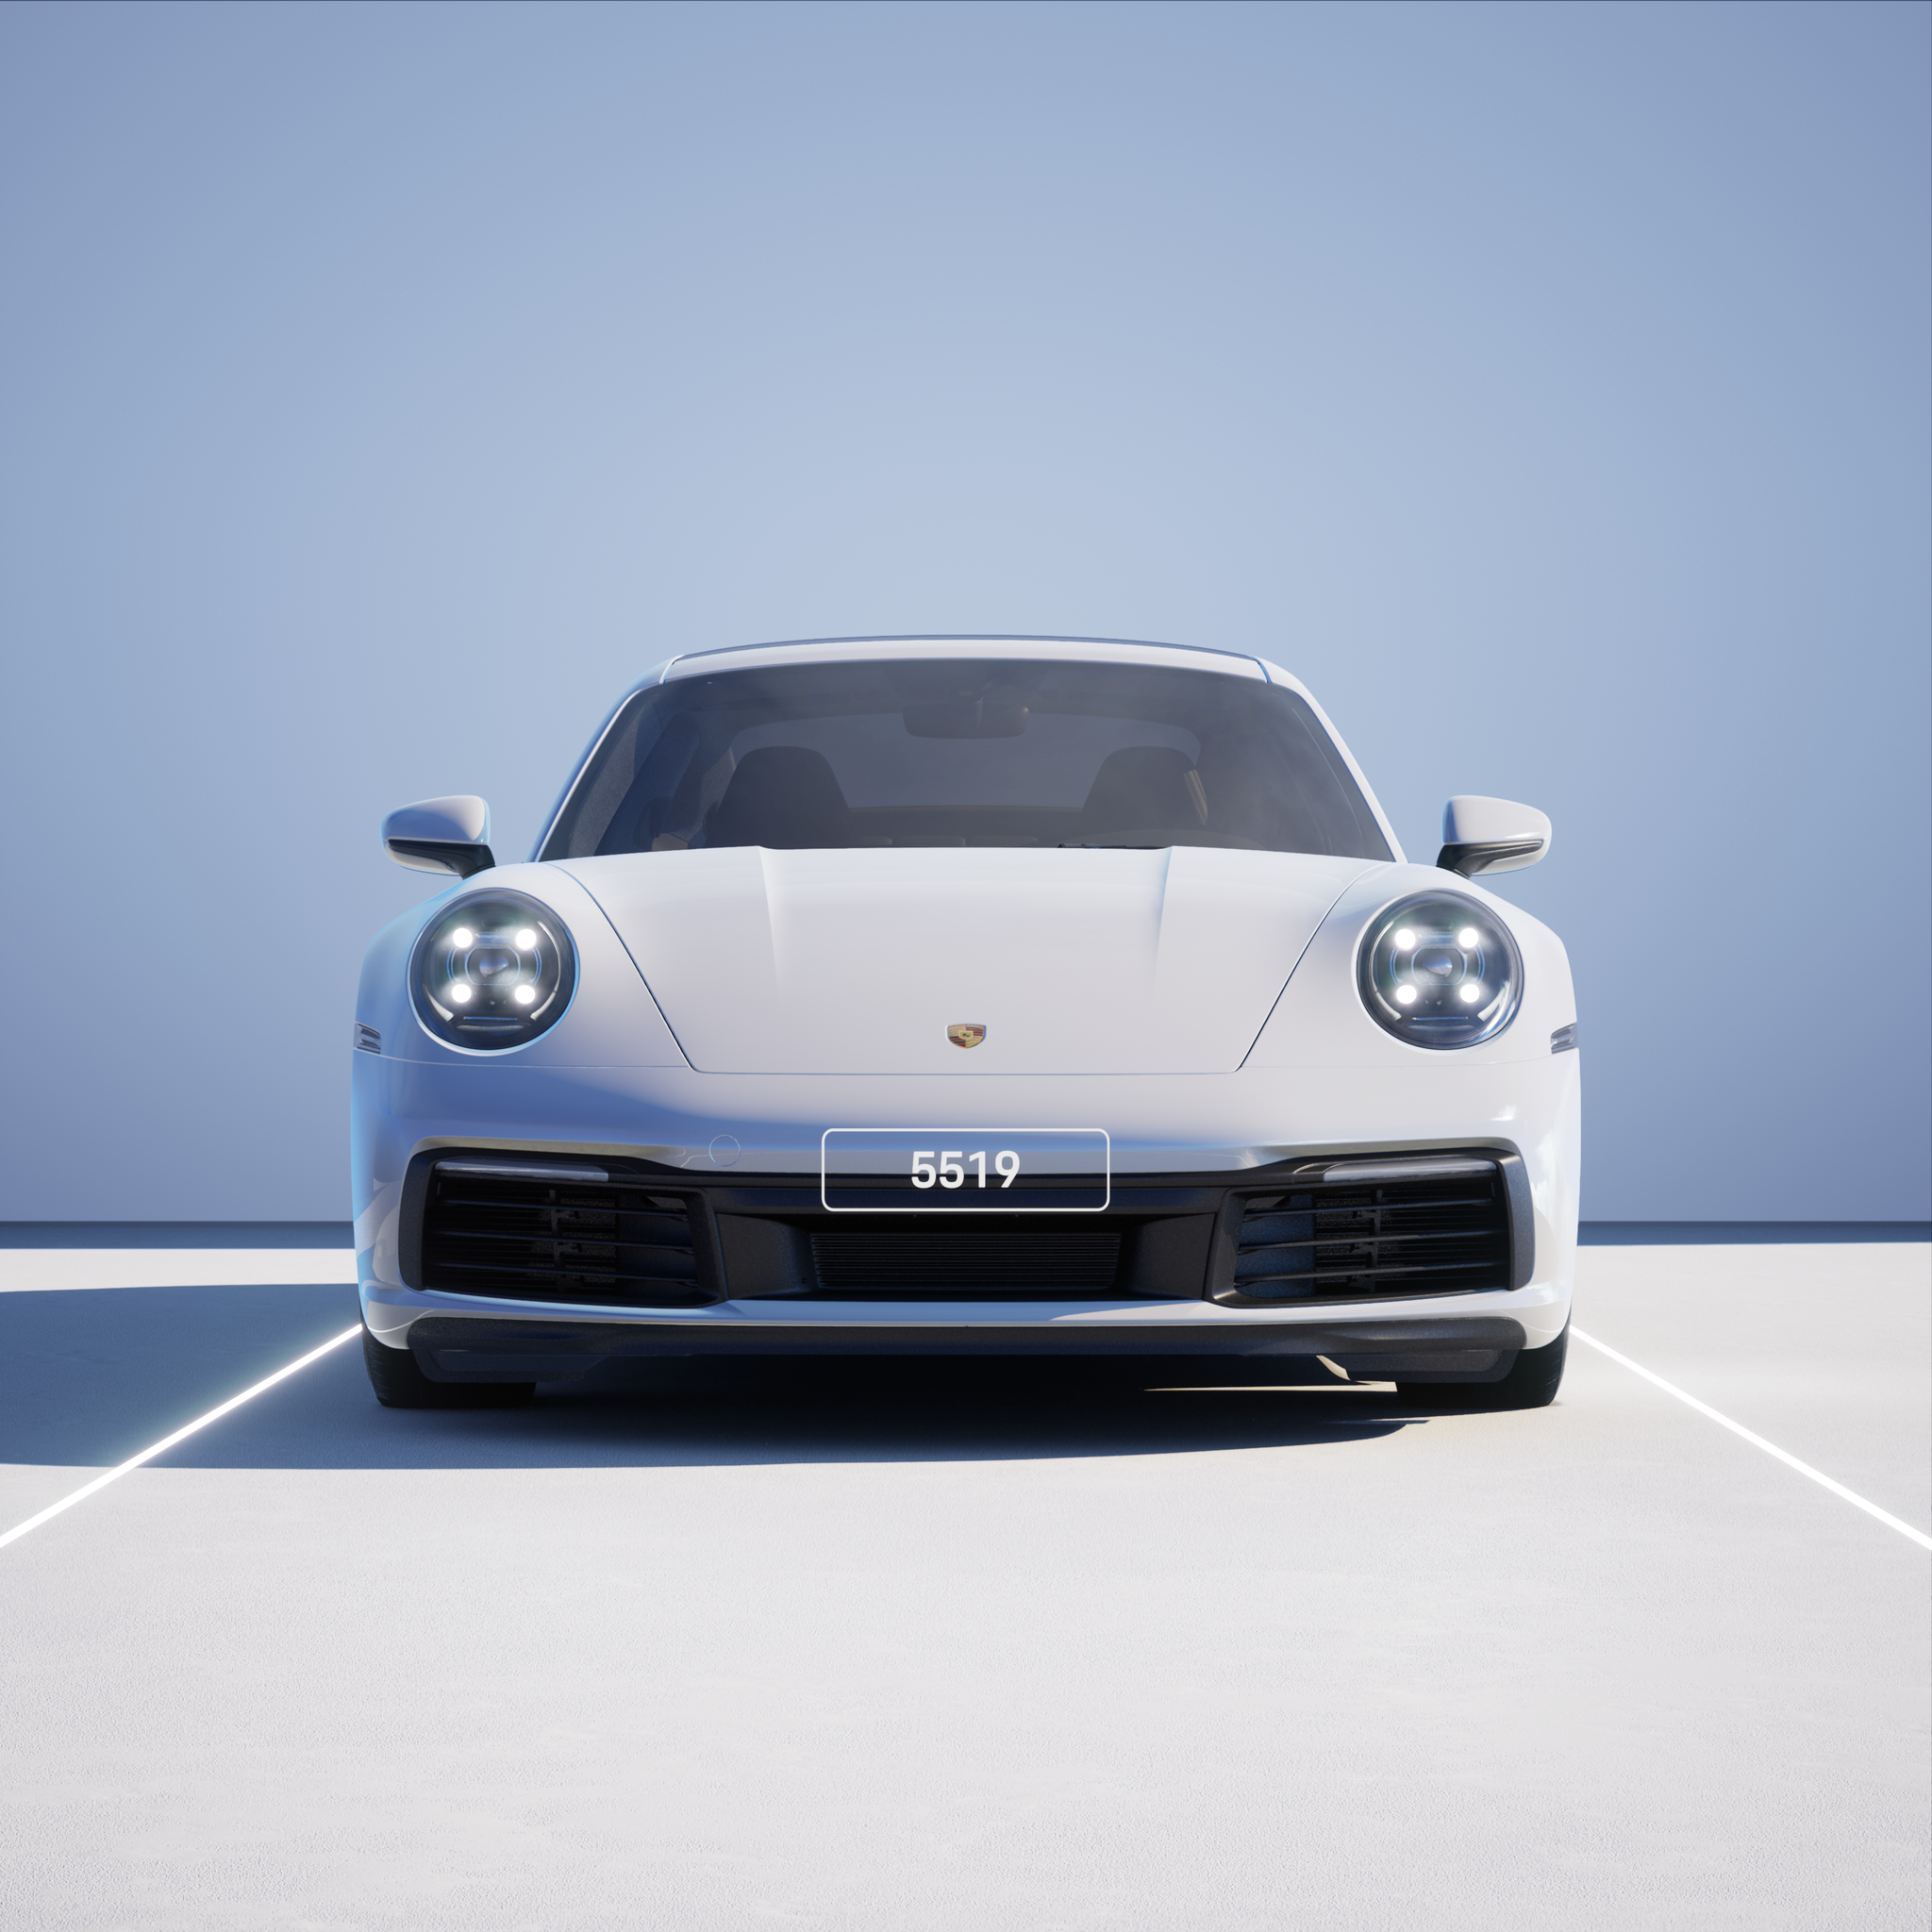 The PORSCHΞ 911 5519 image in phase